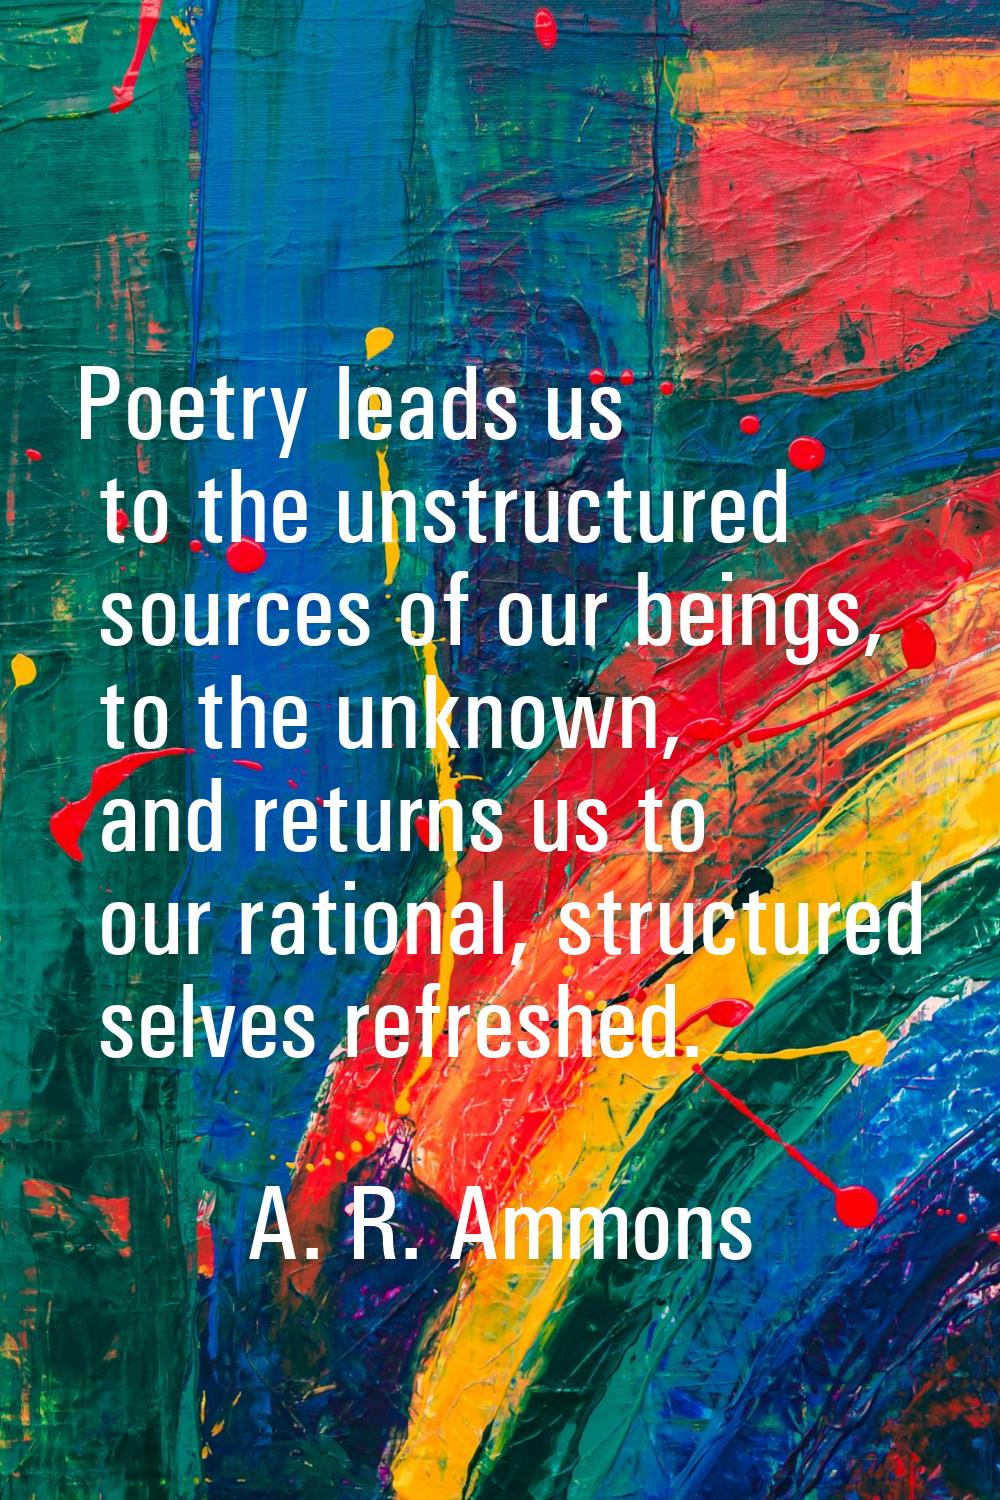 Poetry leads us to the unstructured sources of our beings, to the unknown, and returns us to our ra